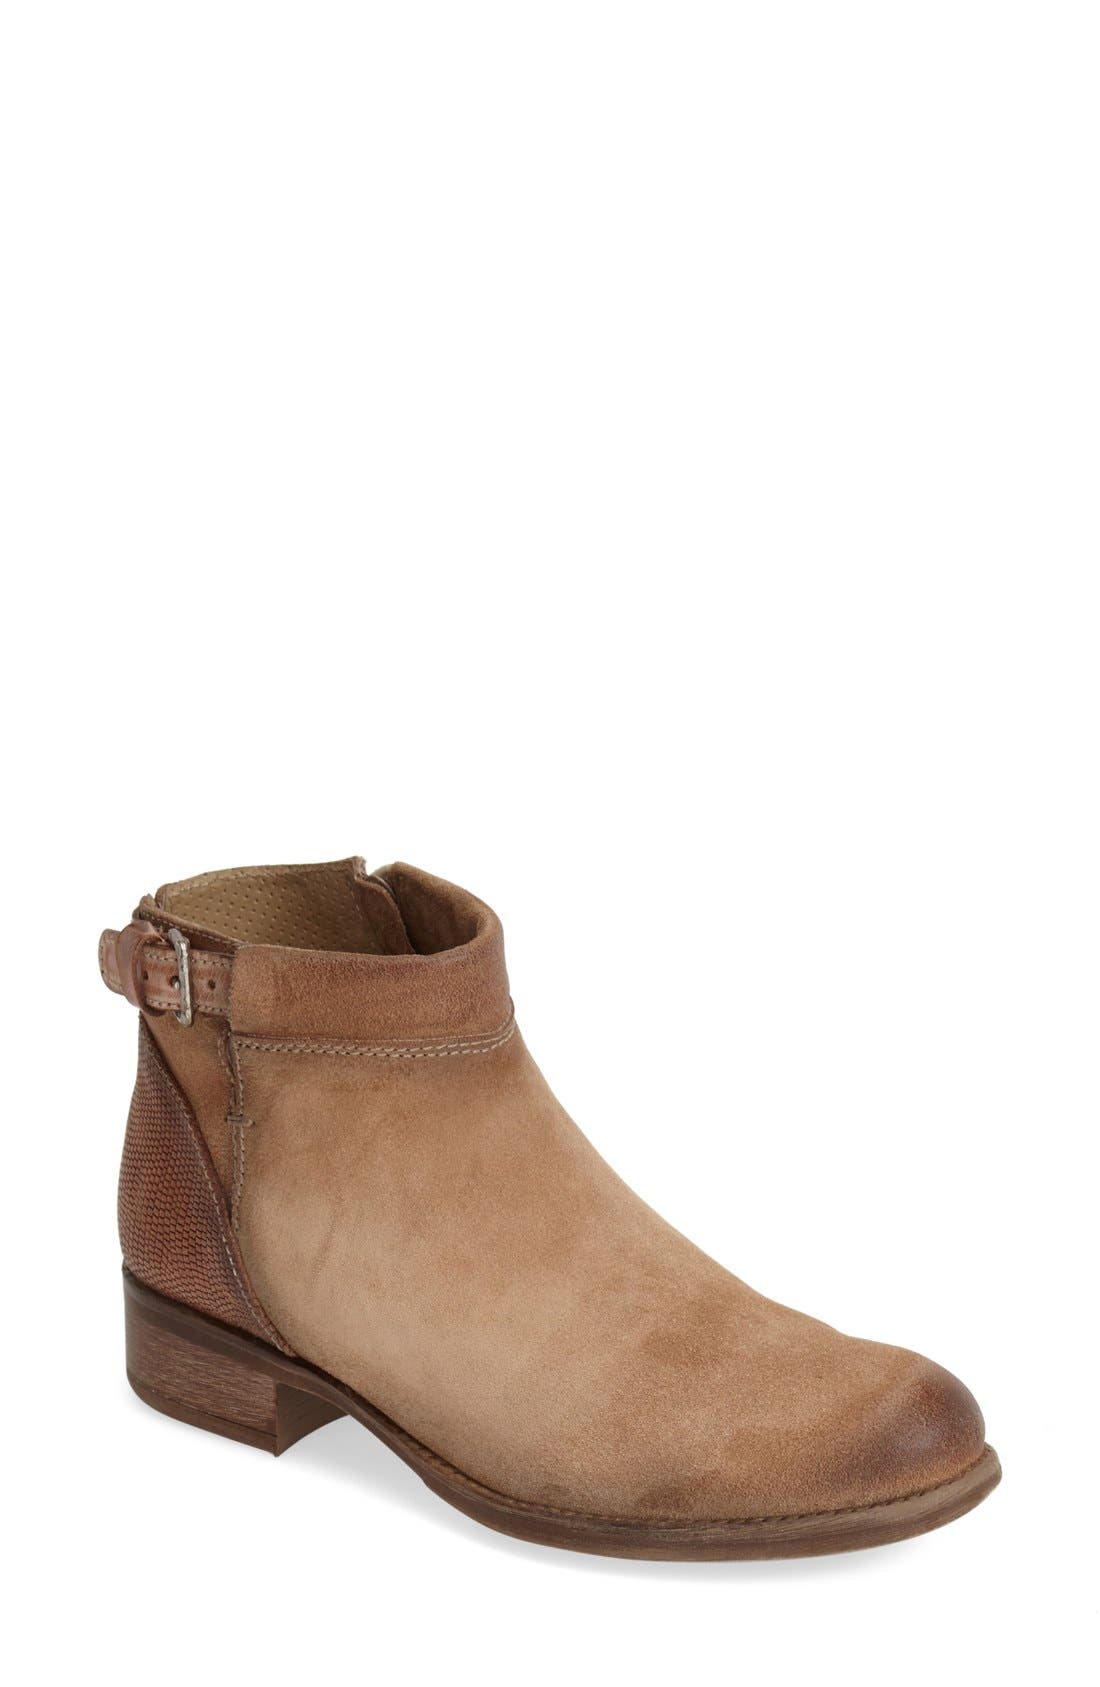 manas boots nordstrom